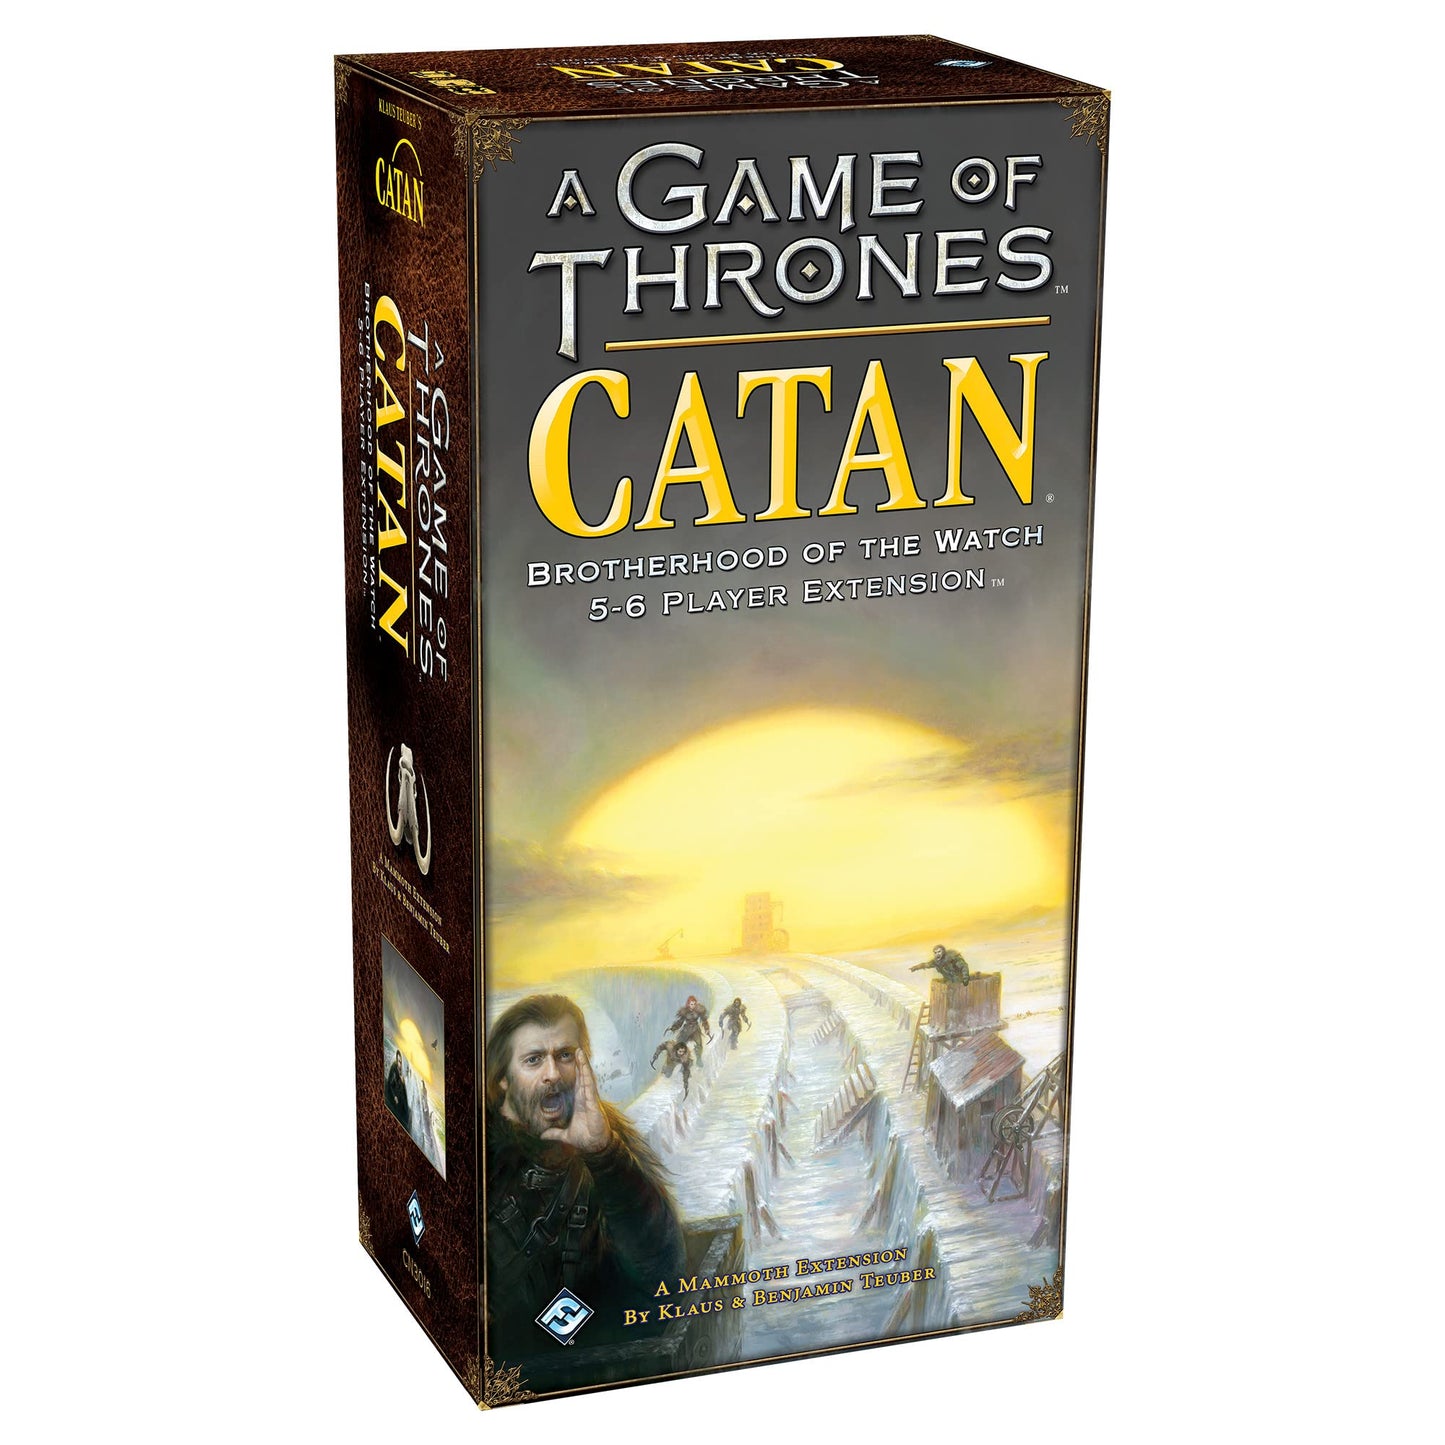 Catan - A Game of Thrones Brotherhood of the Watch 5-6 Players Extension